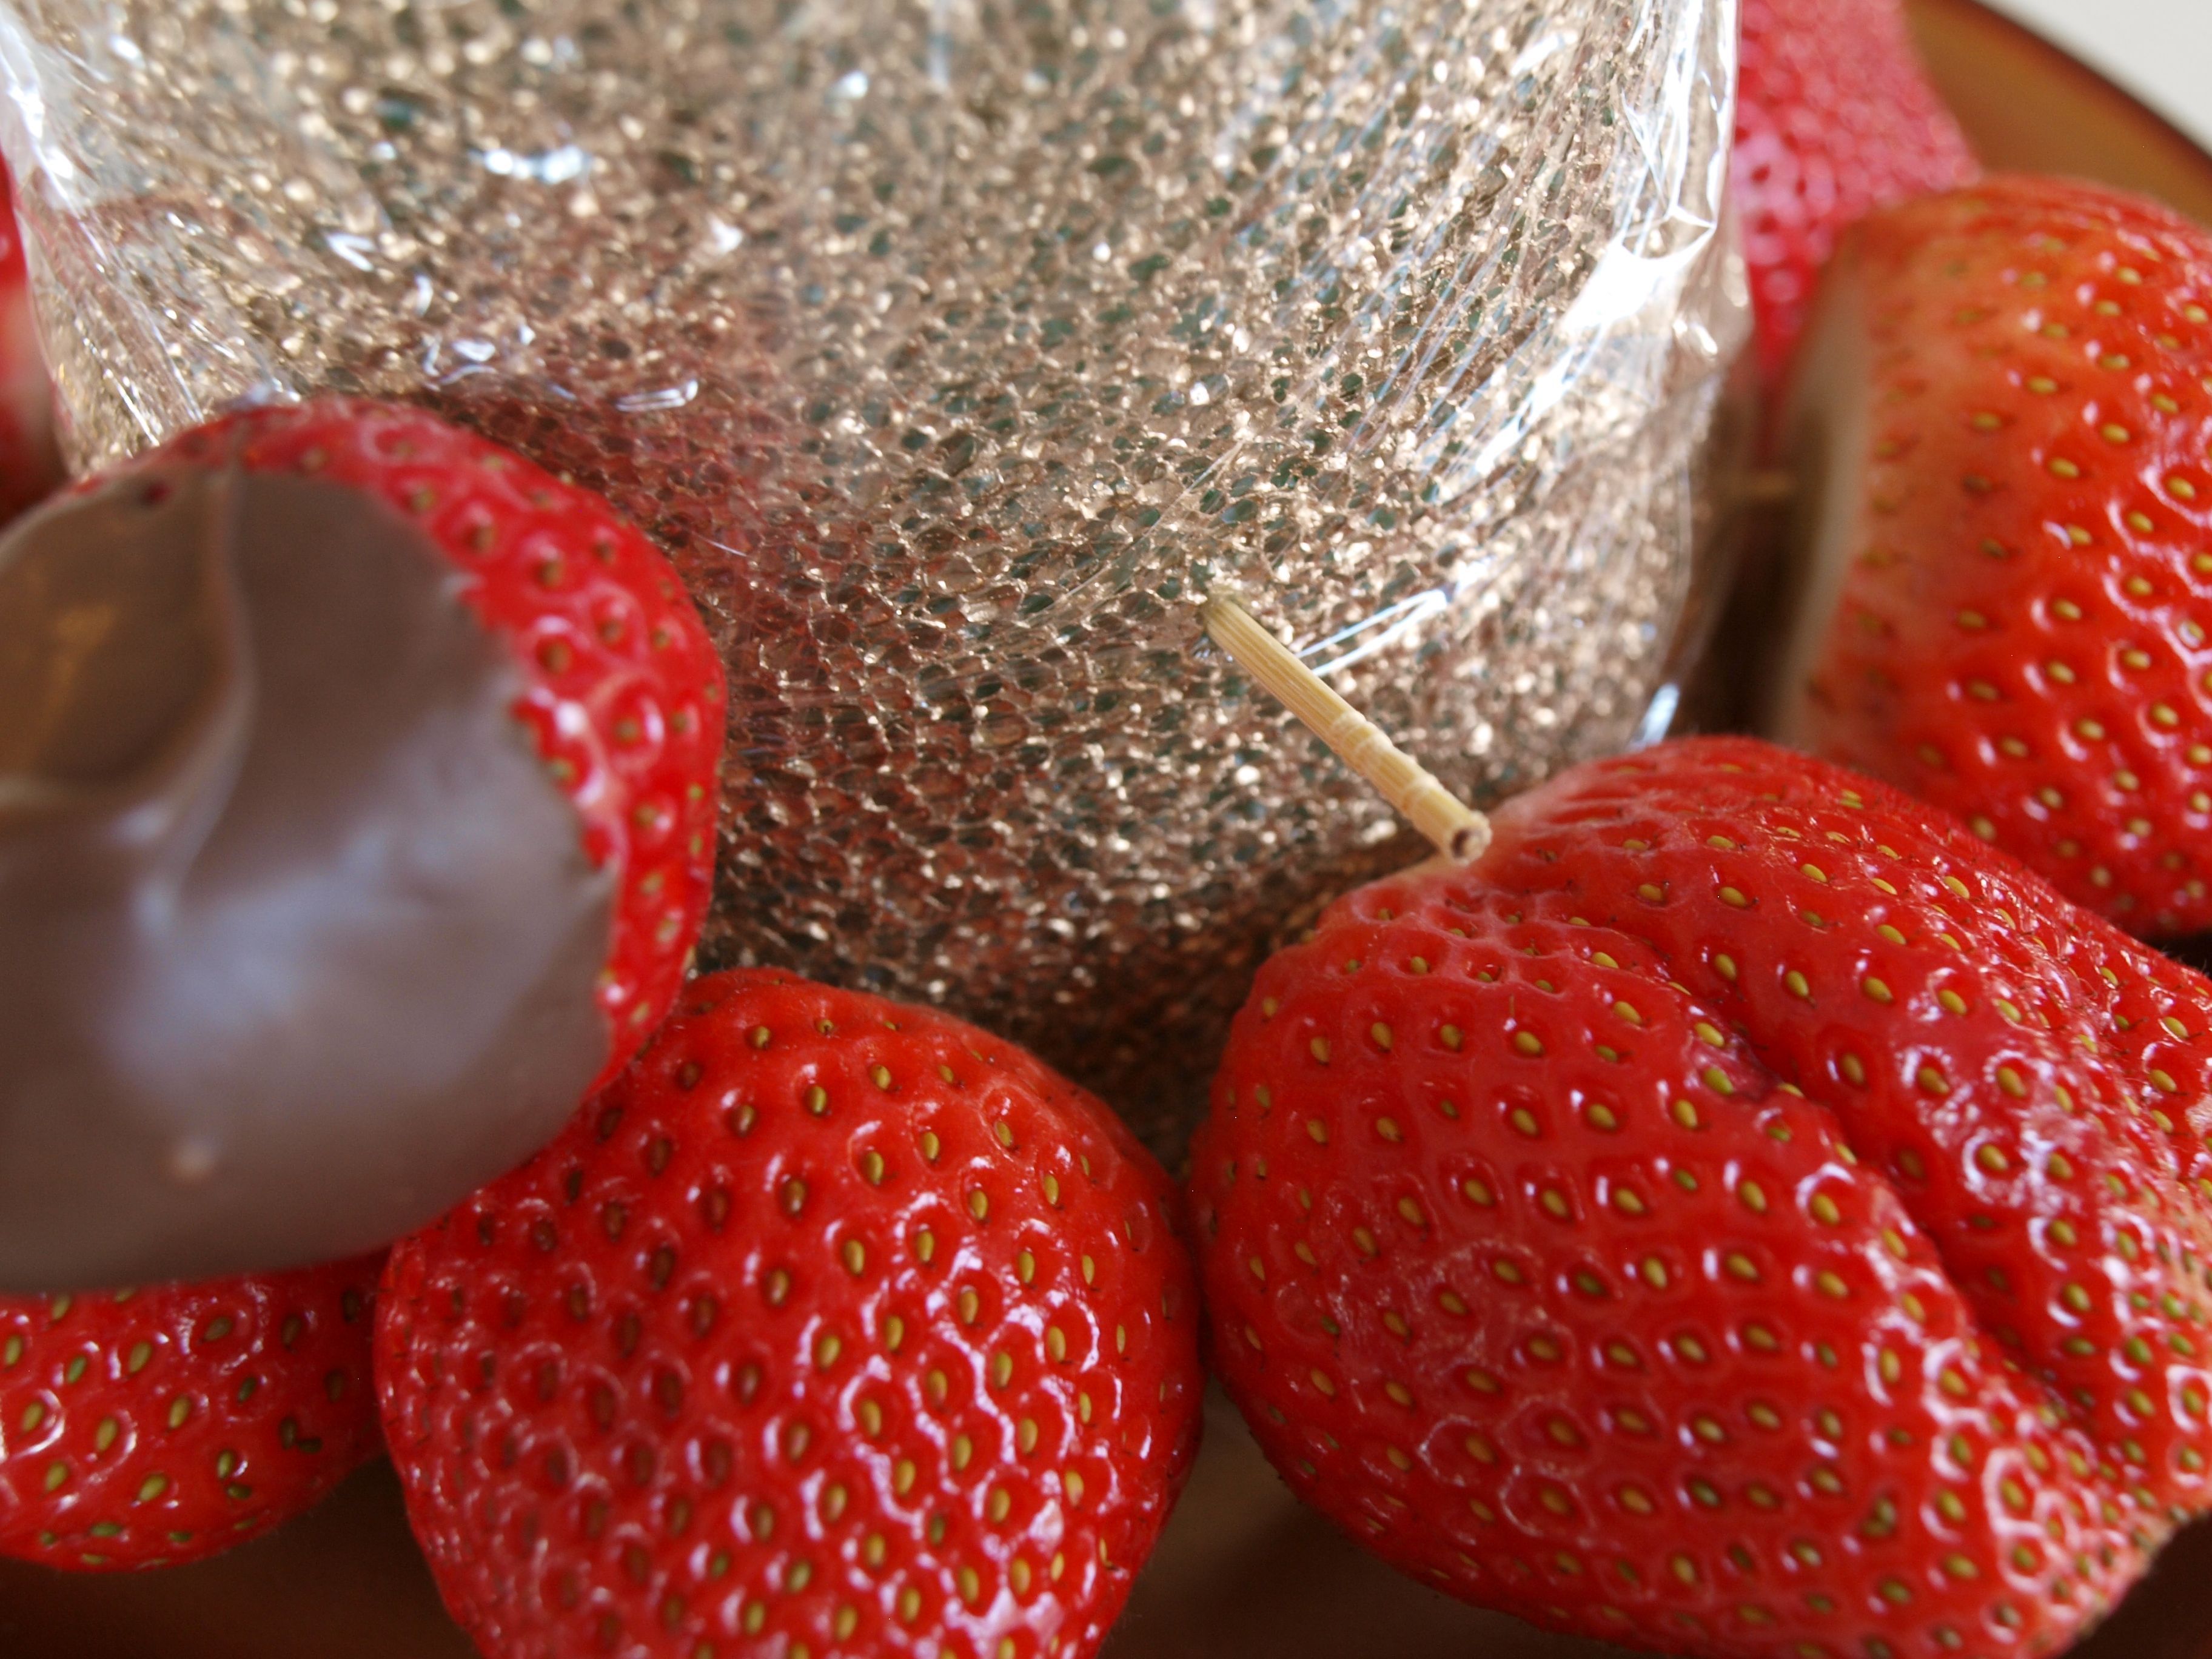 5. Place a row of strawberries on the cone -   How to Create a Chocolate Tree